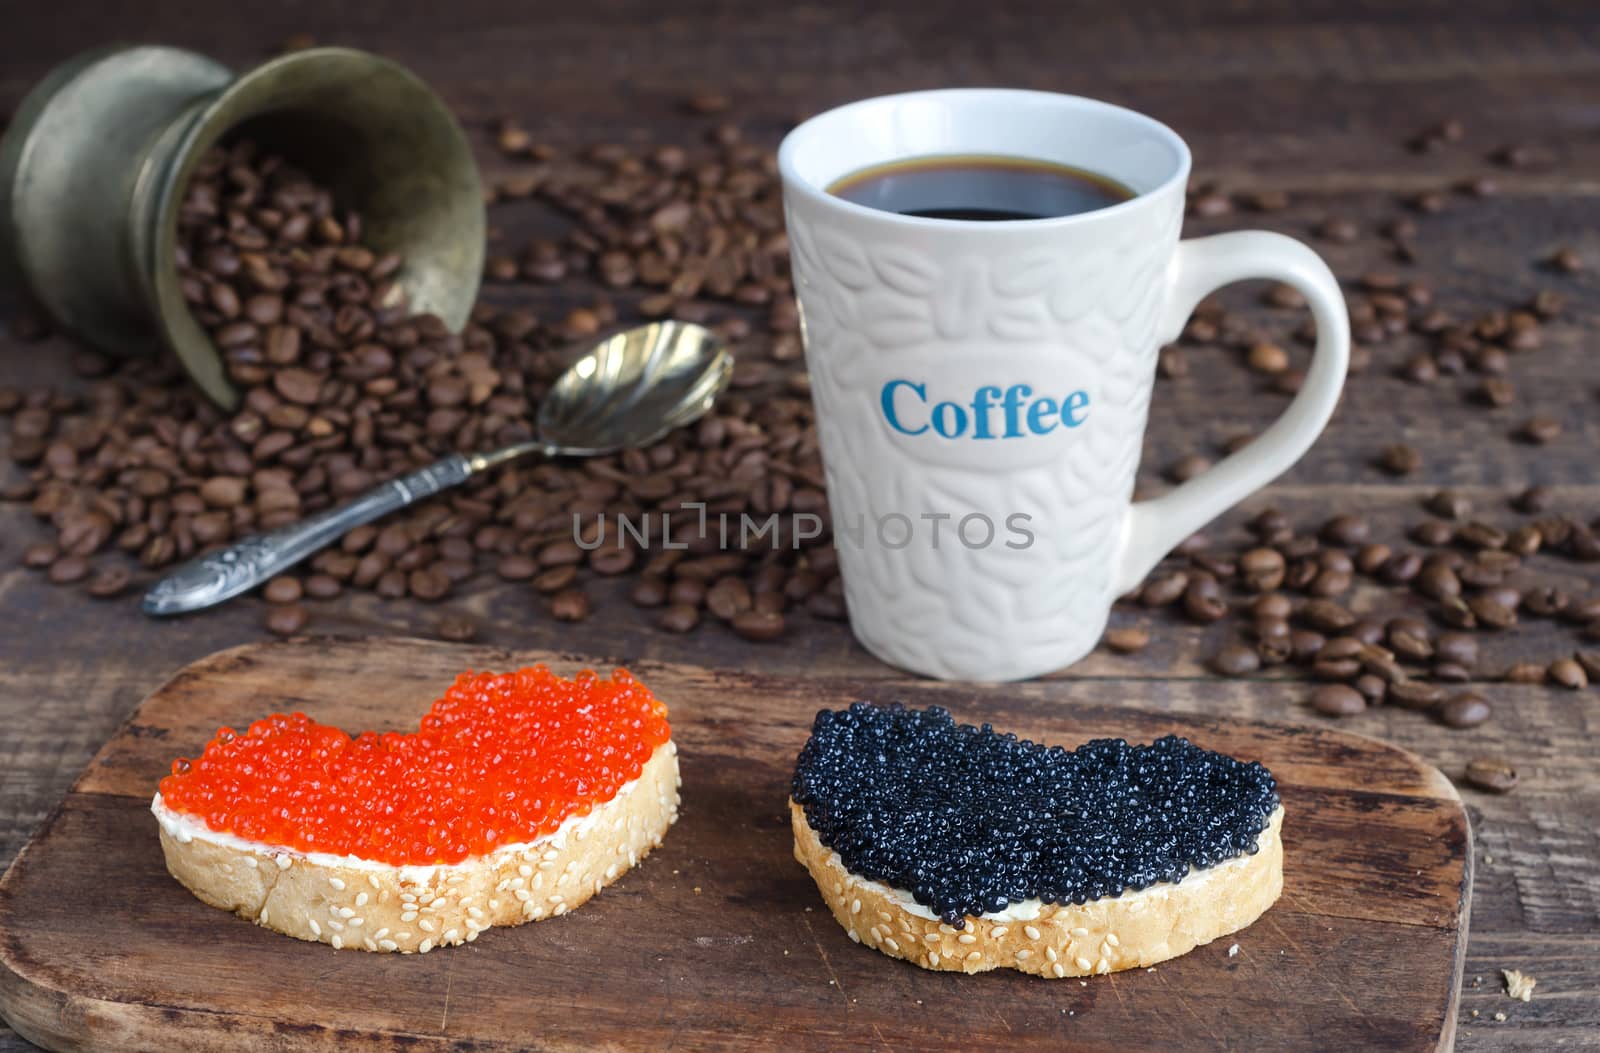 Sandwiches in the shape of a heart with black and red caviar and coffee in a mug with an inscription on the wooden surface. The roasted beans.